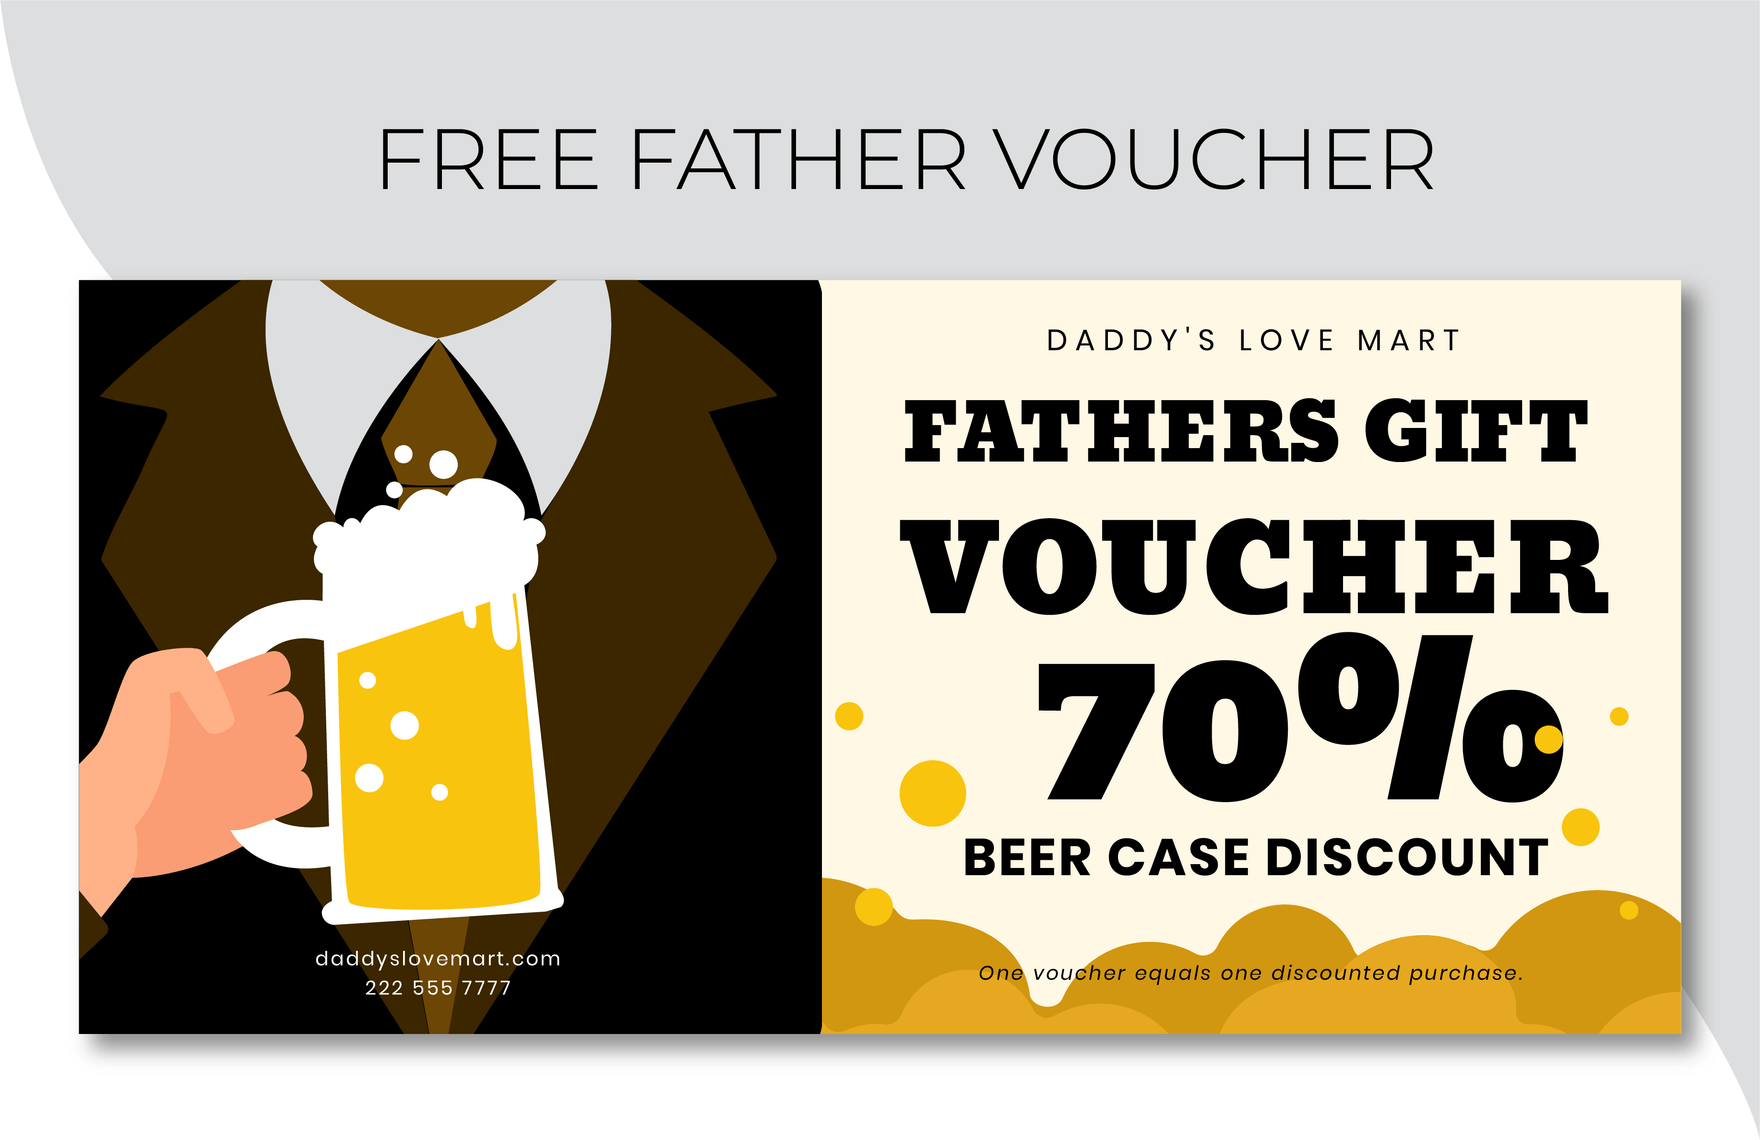 Free Father Voucher in Word, Google Docs, Illustrator, PSD